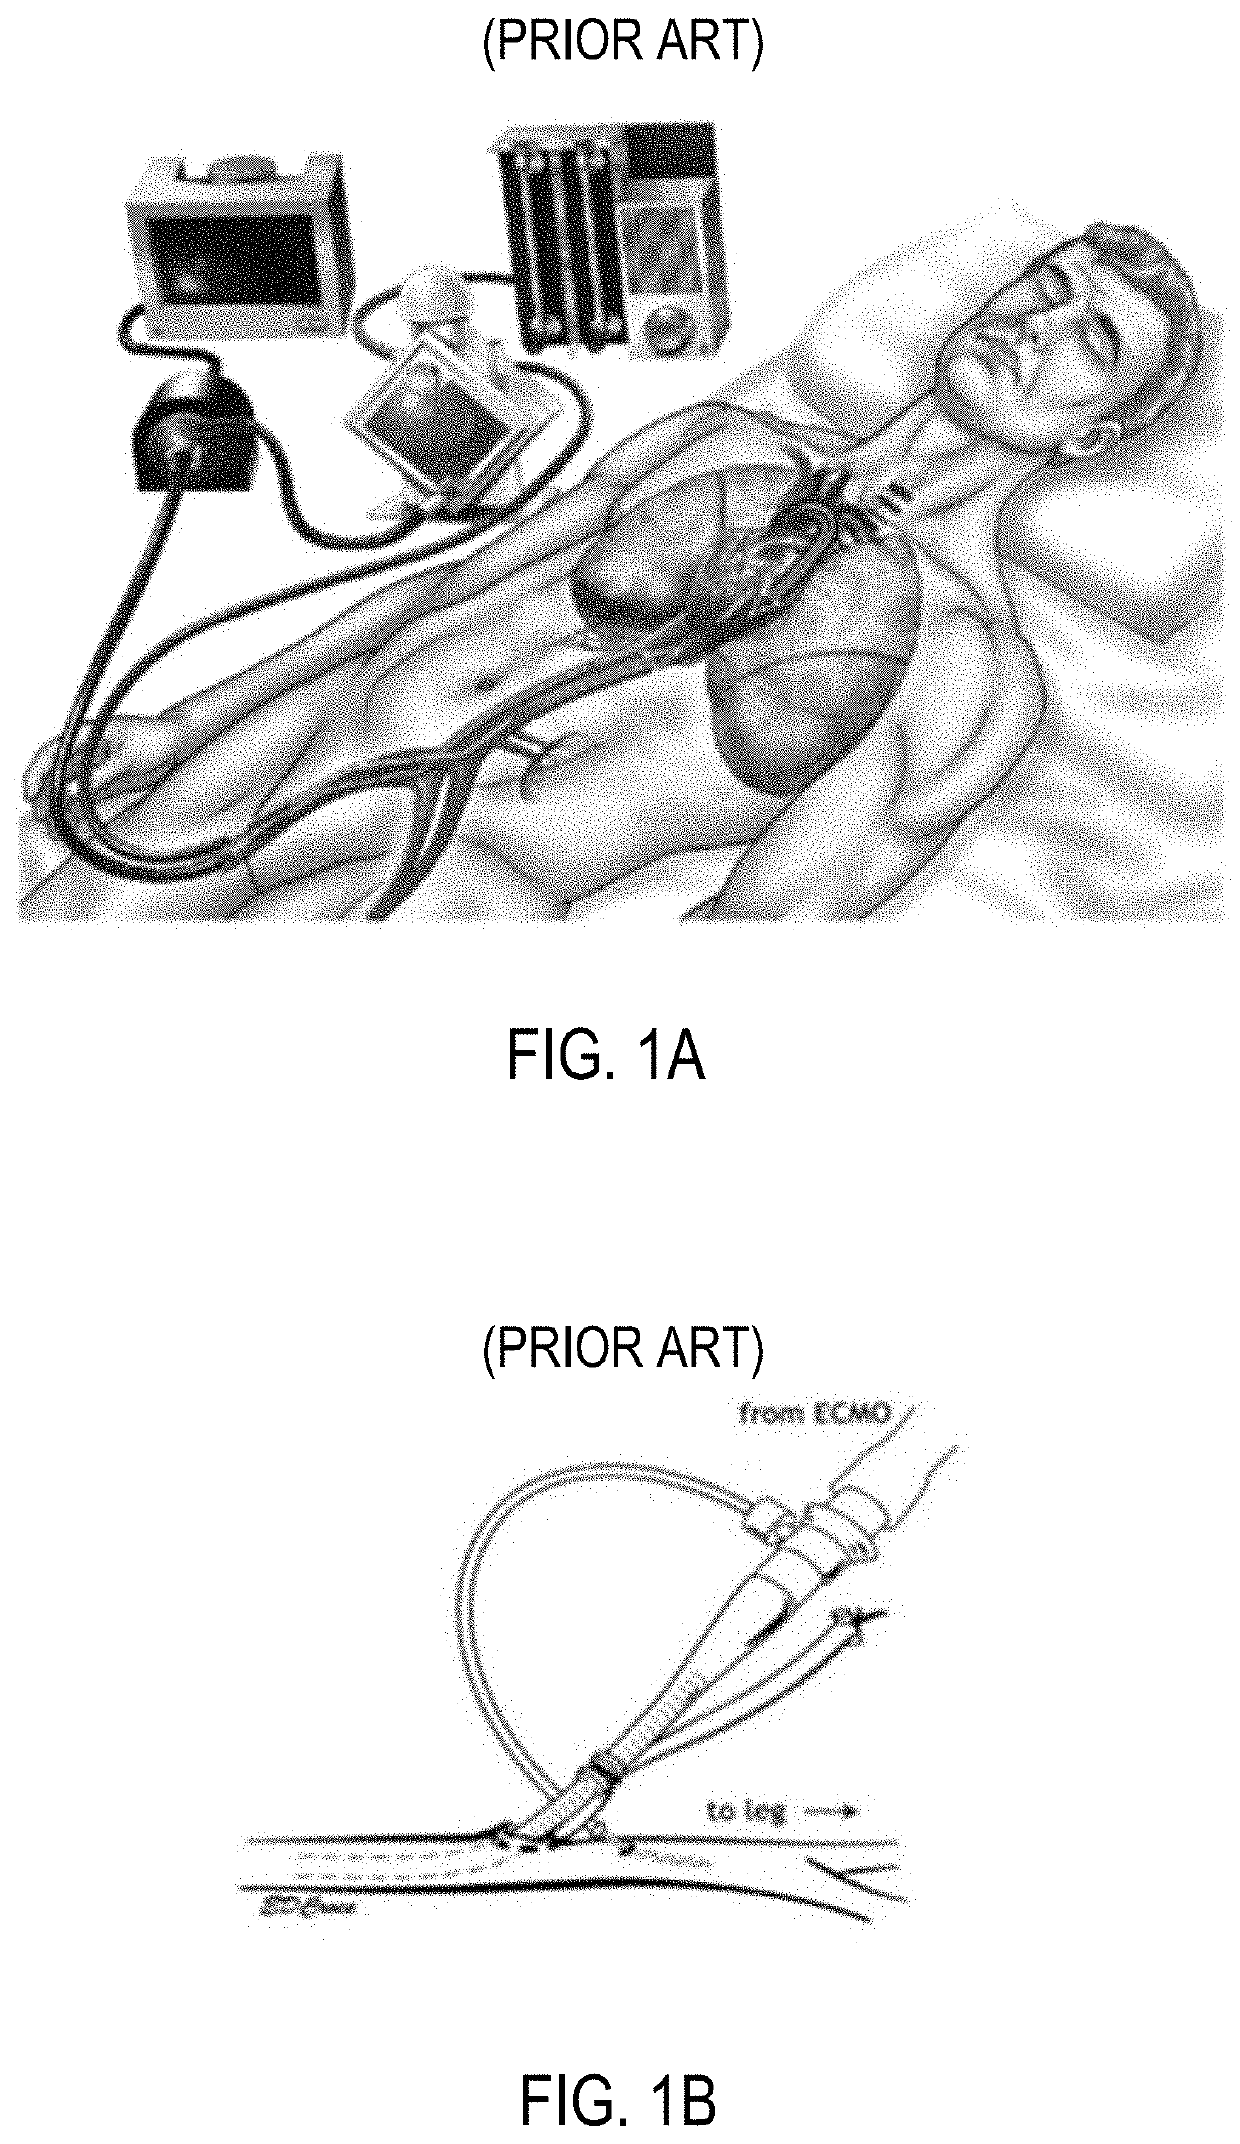 Systems and methods for diverting blood flow in blood vessels